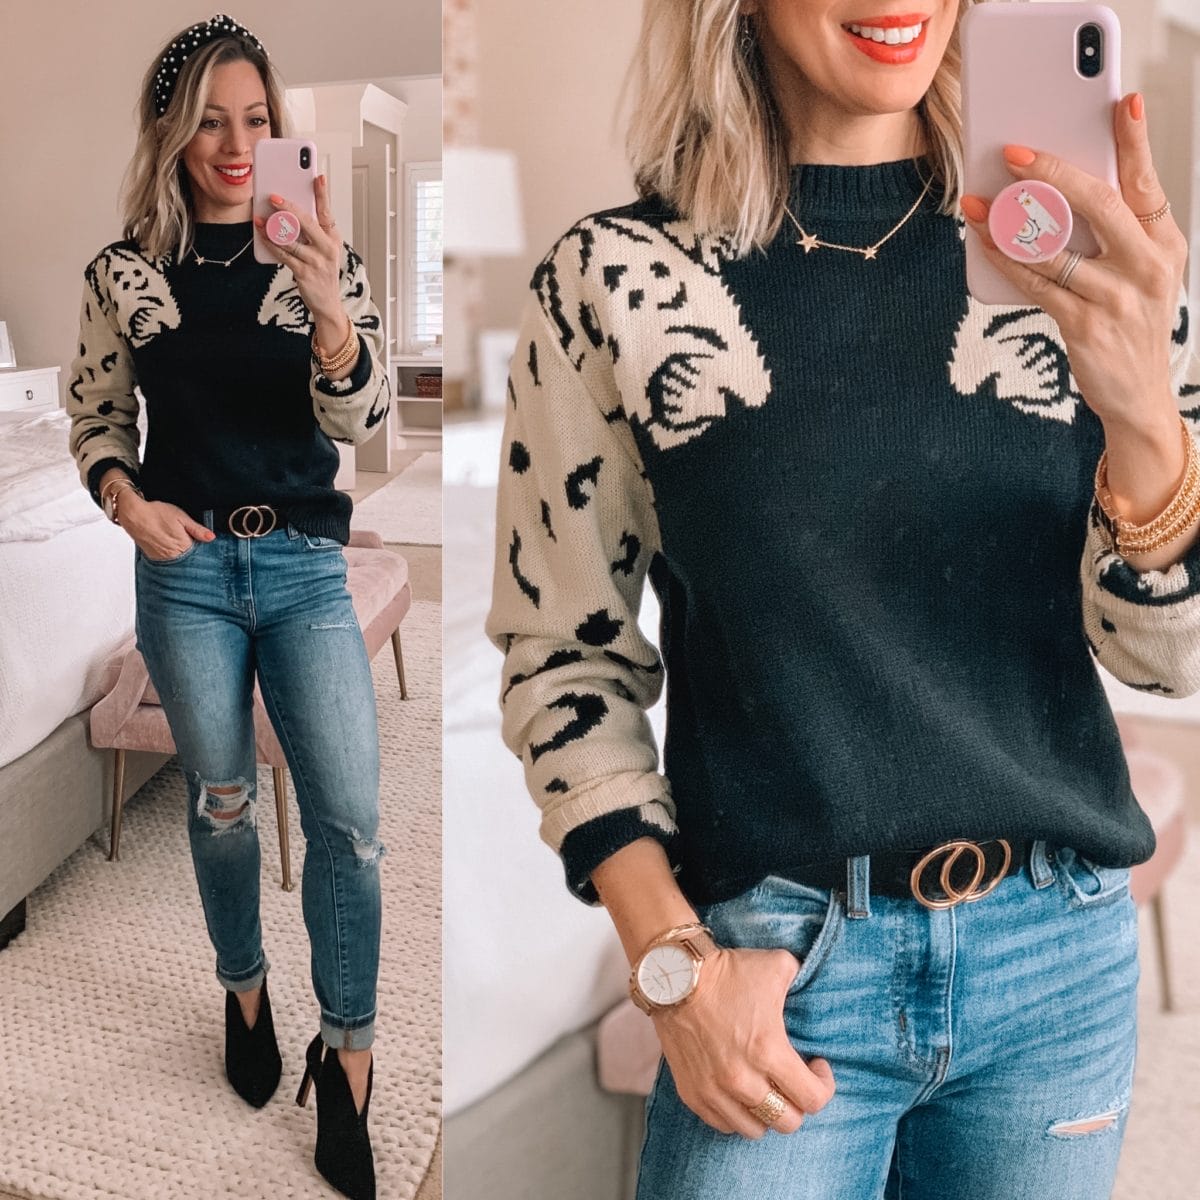 Leopard Sleeve Sweater, Distressed Blue Jeans, Black Booties, Star Necklace